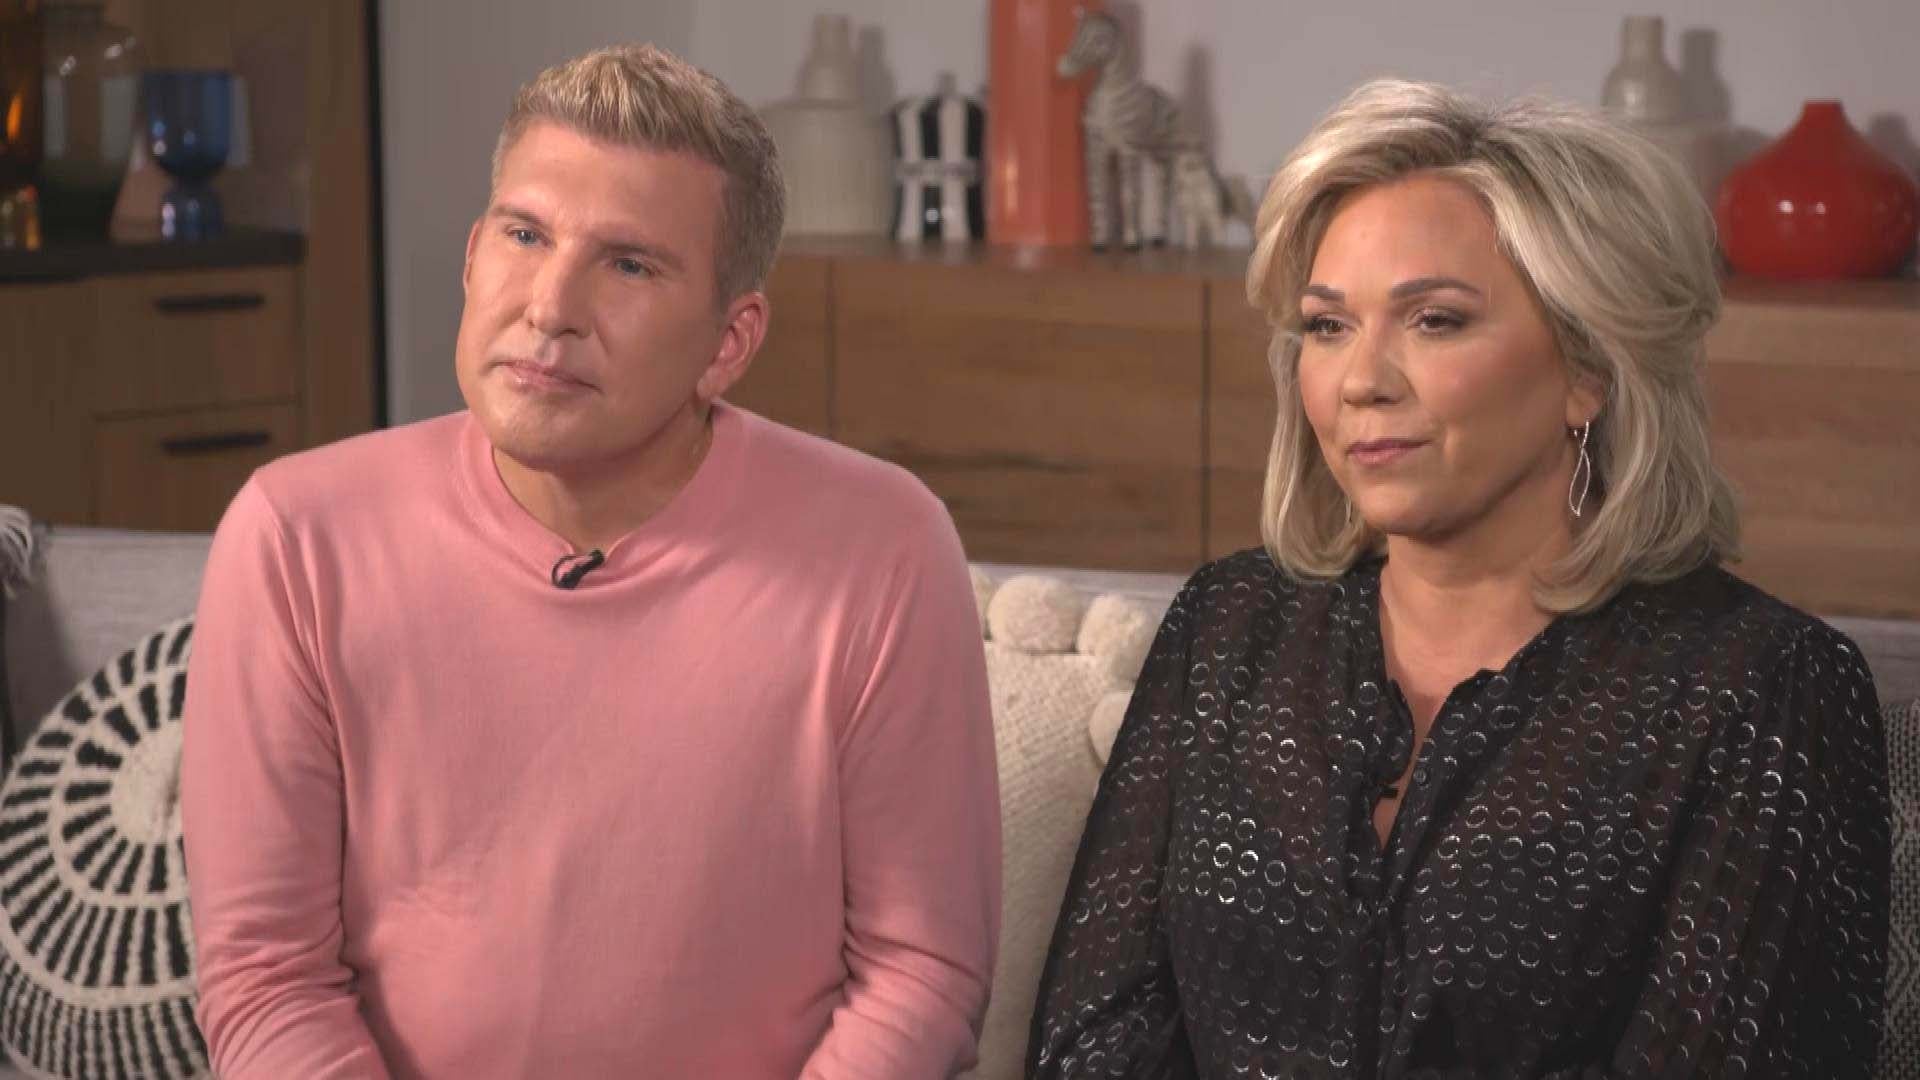 Todd and Julie Chrisley Share Message on Tomorrow Not Being Promised After Prison Sentencing 